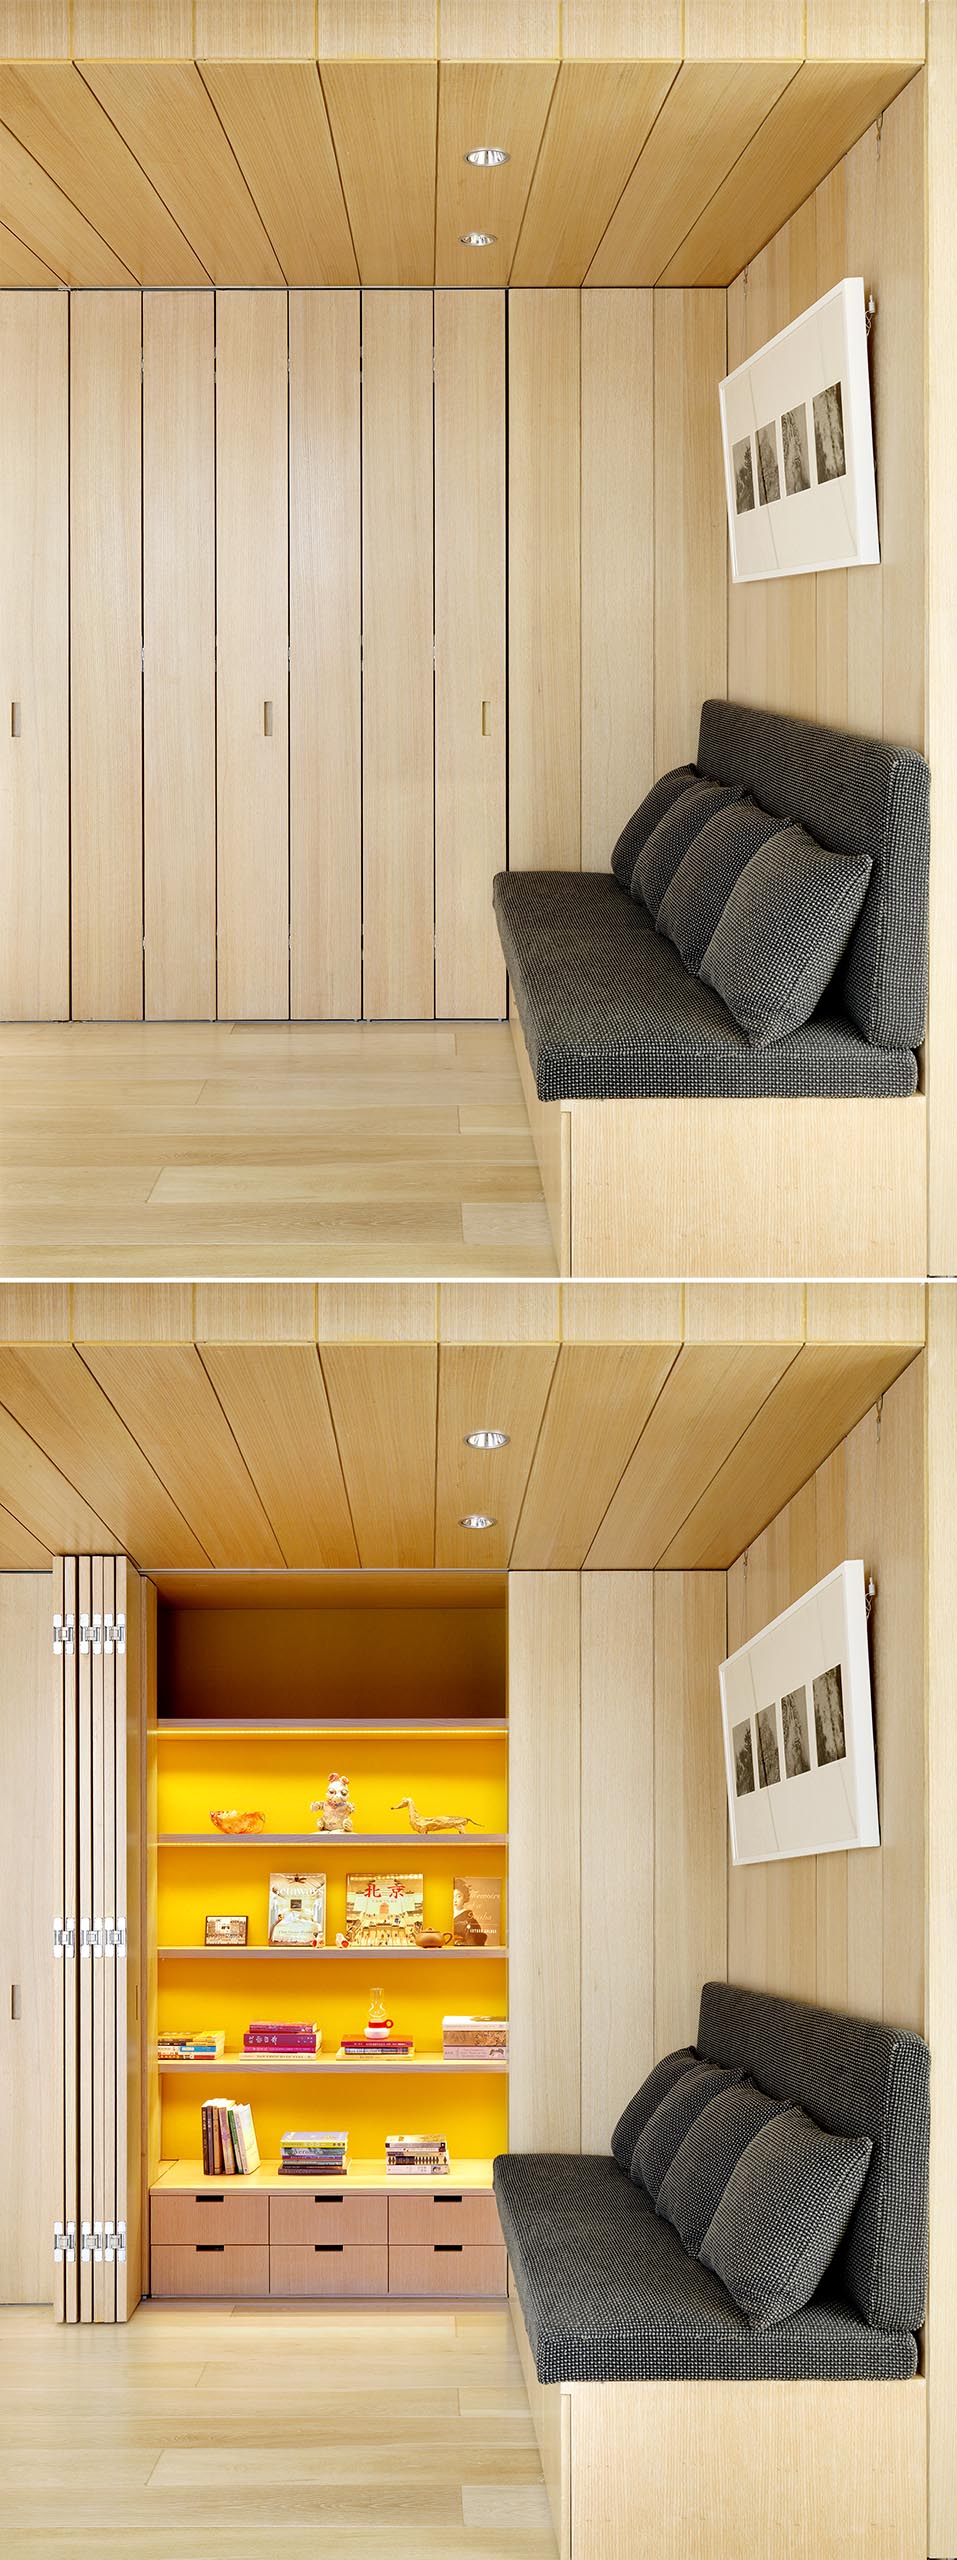 Shelving and drawers with a yellow backdrop are hidden within floor-to-ceiling wood doors.